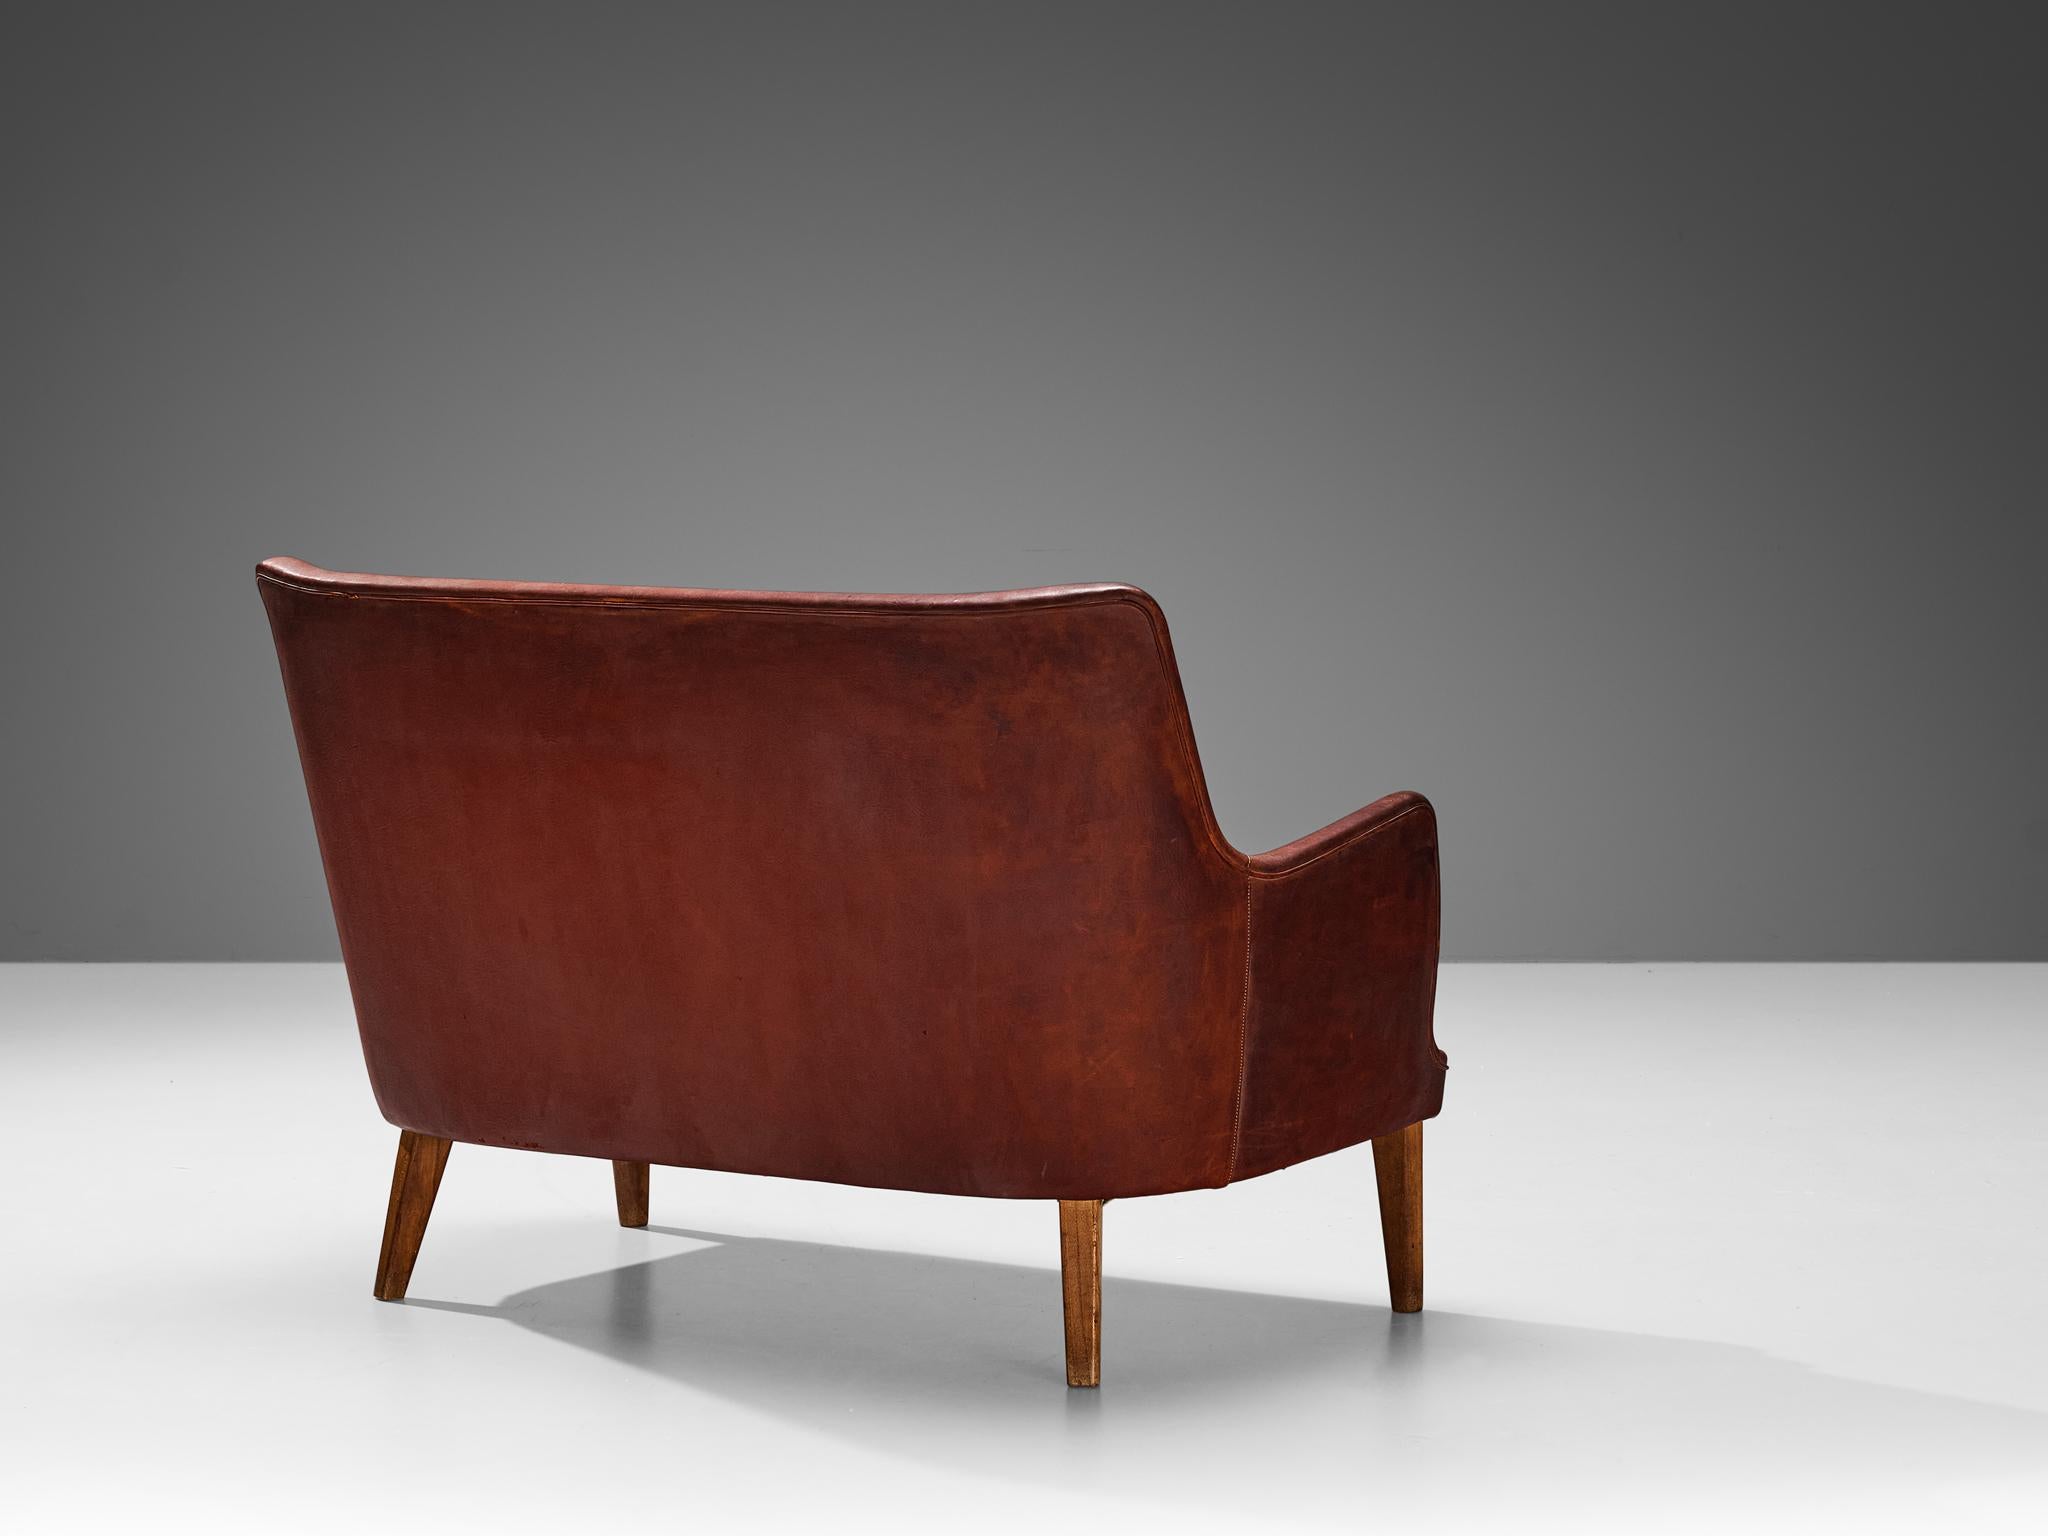 Danish Arne Vodder Sofa in Patinated Cognac Leather For Sale